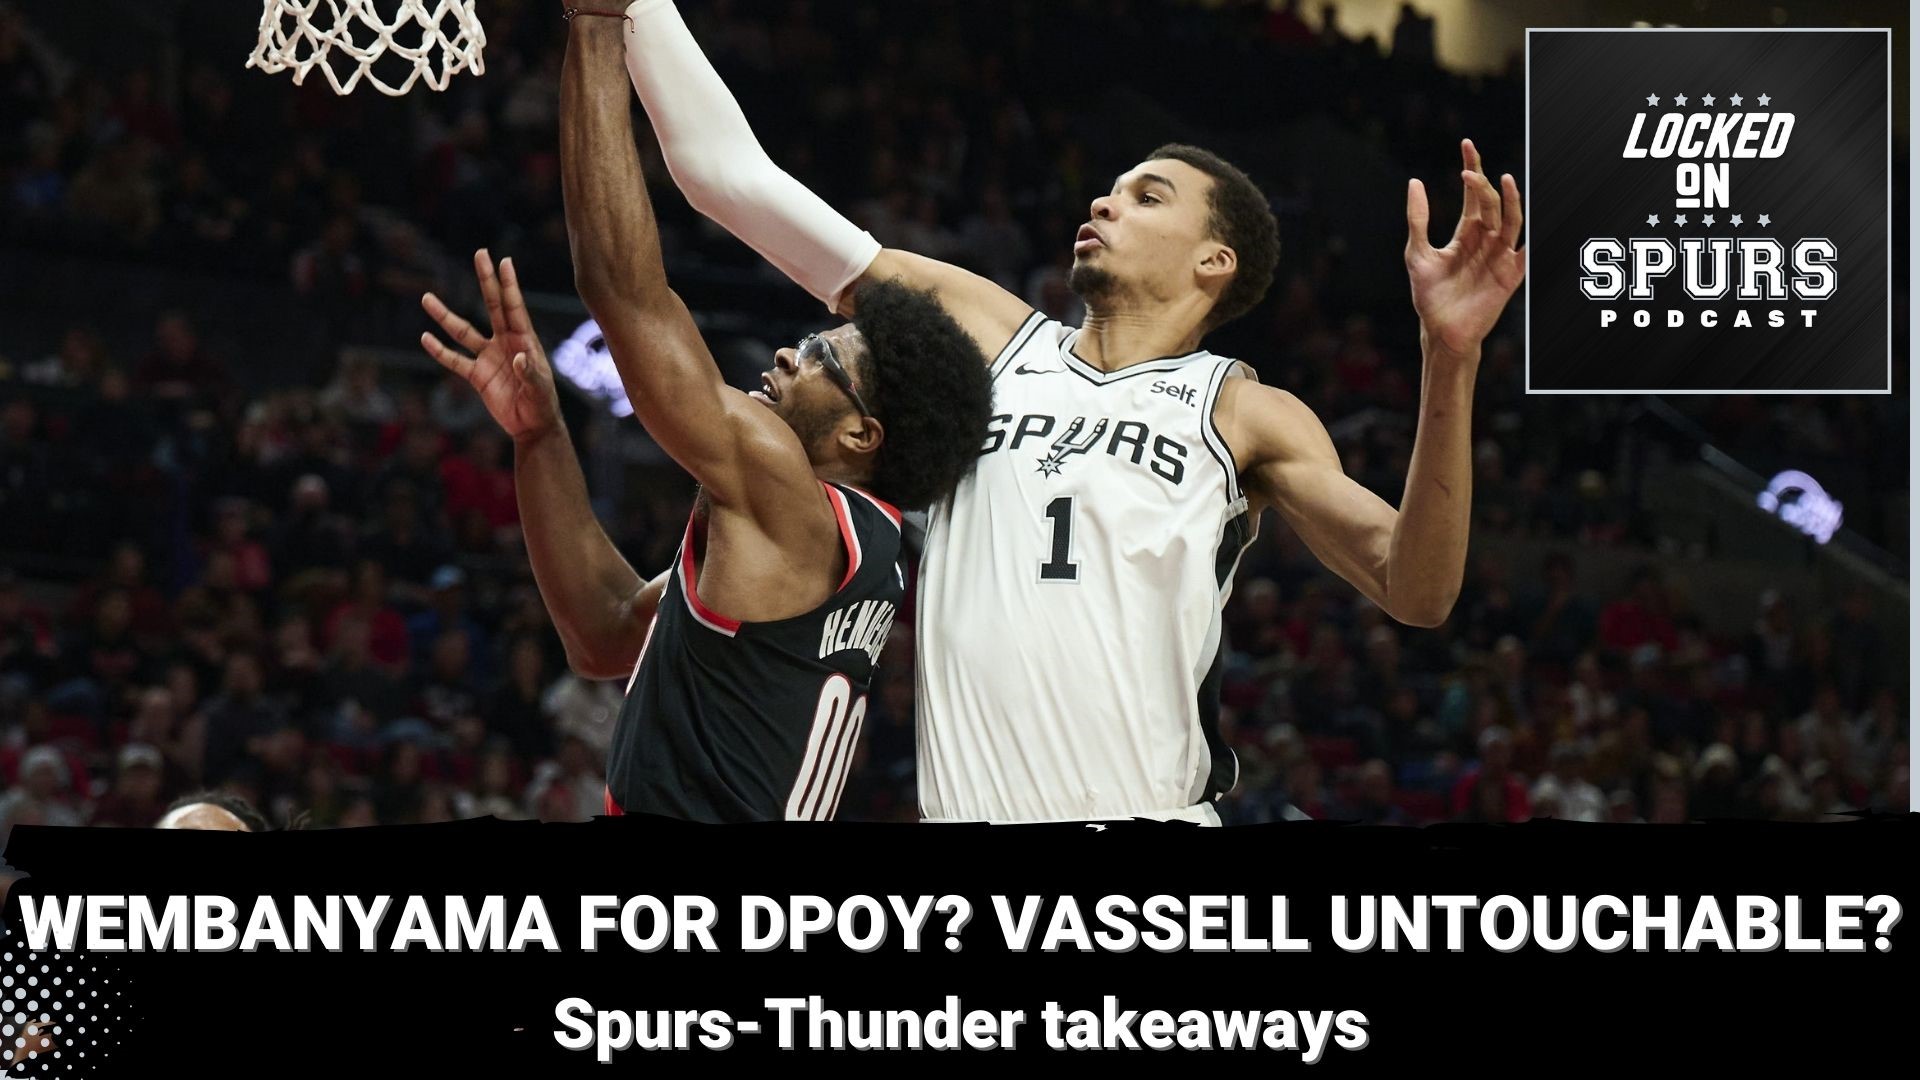 Also, what are some key takeaways from the Spurs' win over the Thunder?